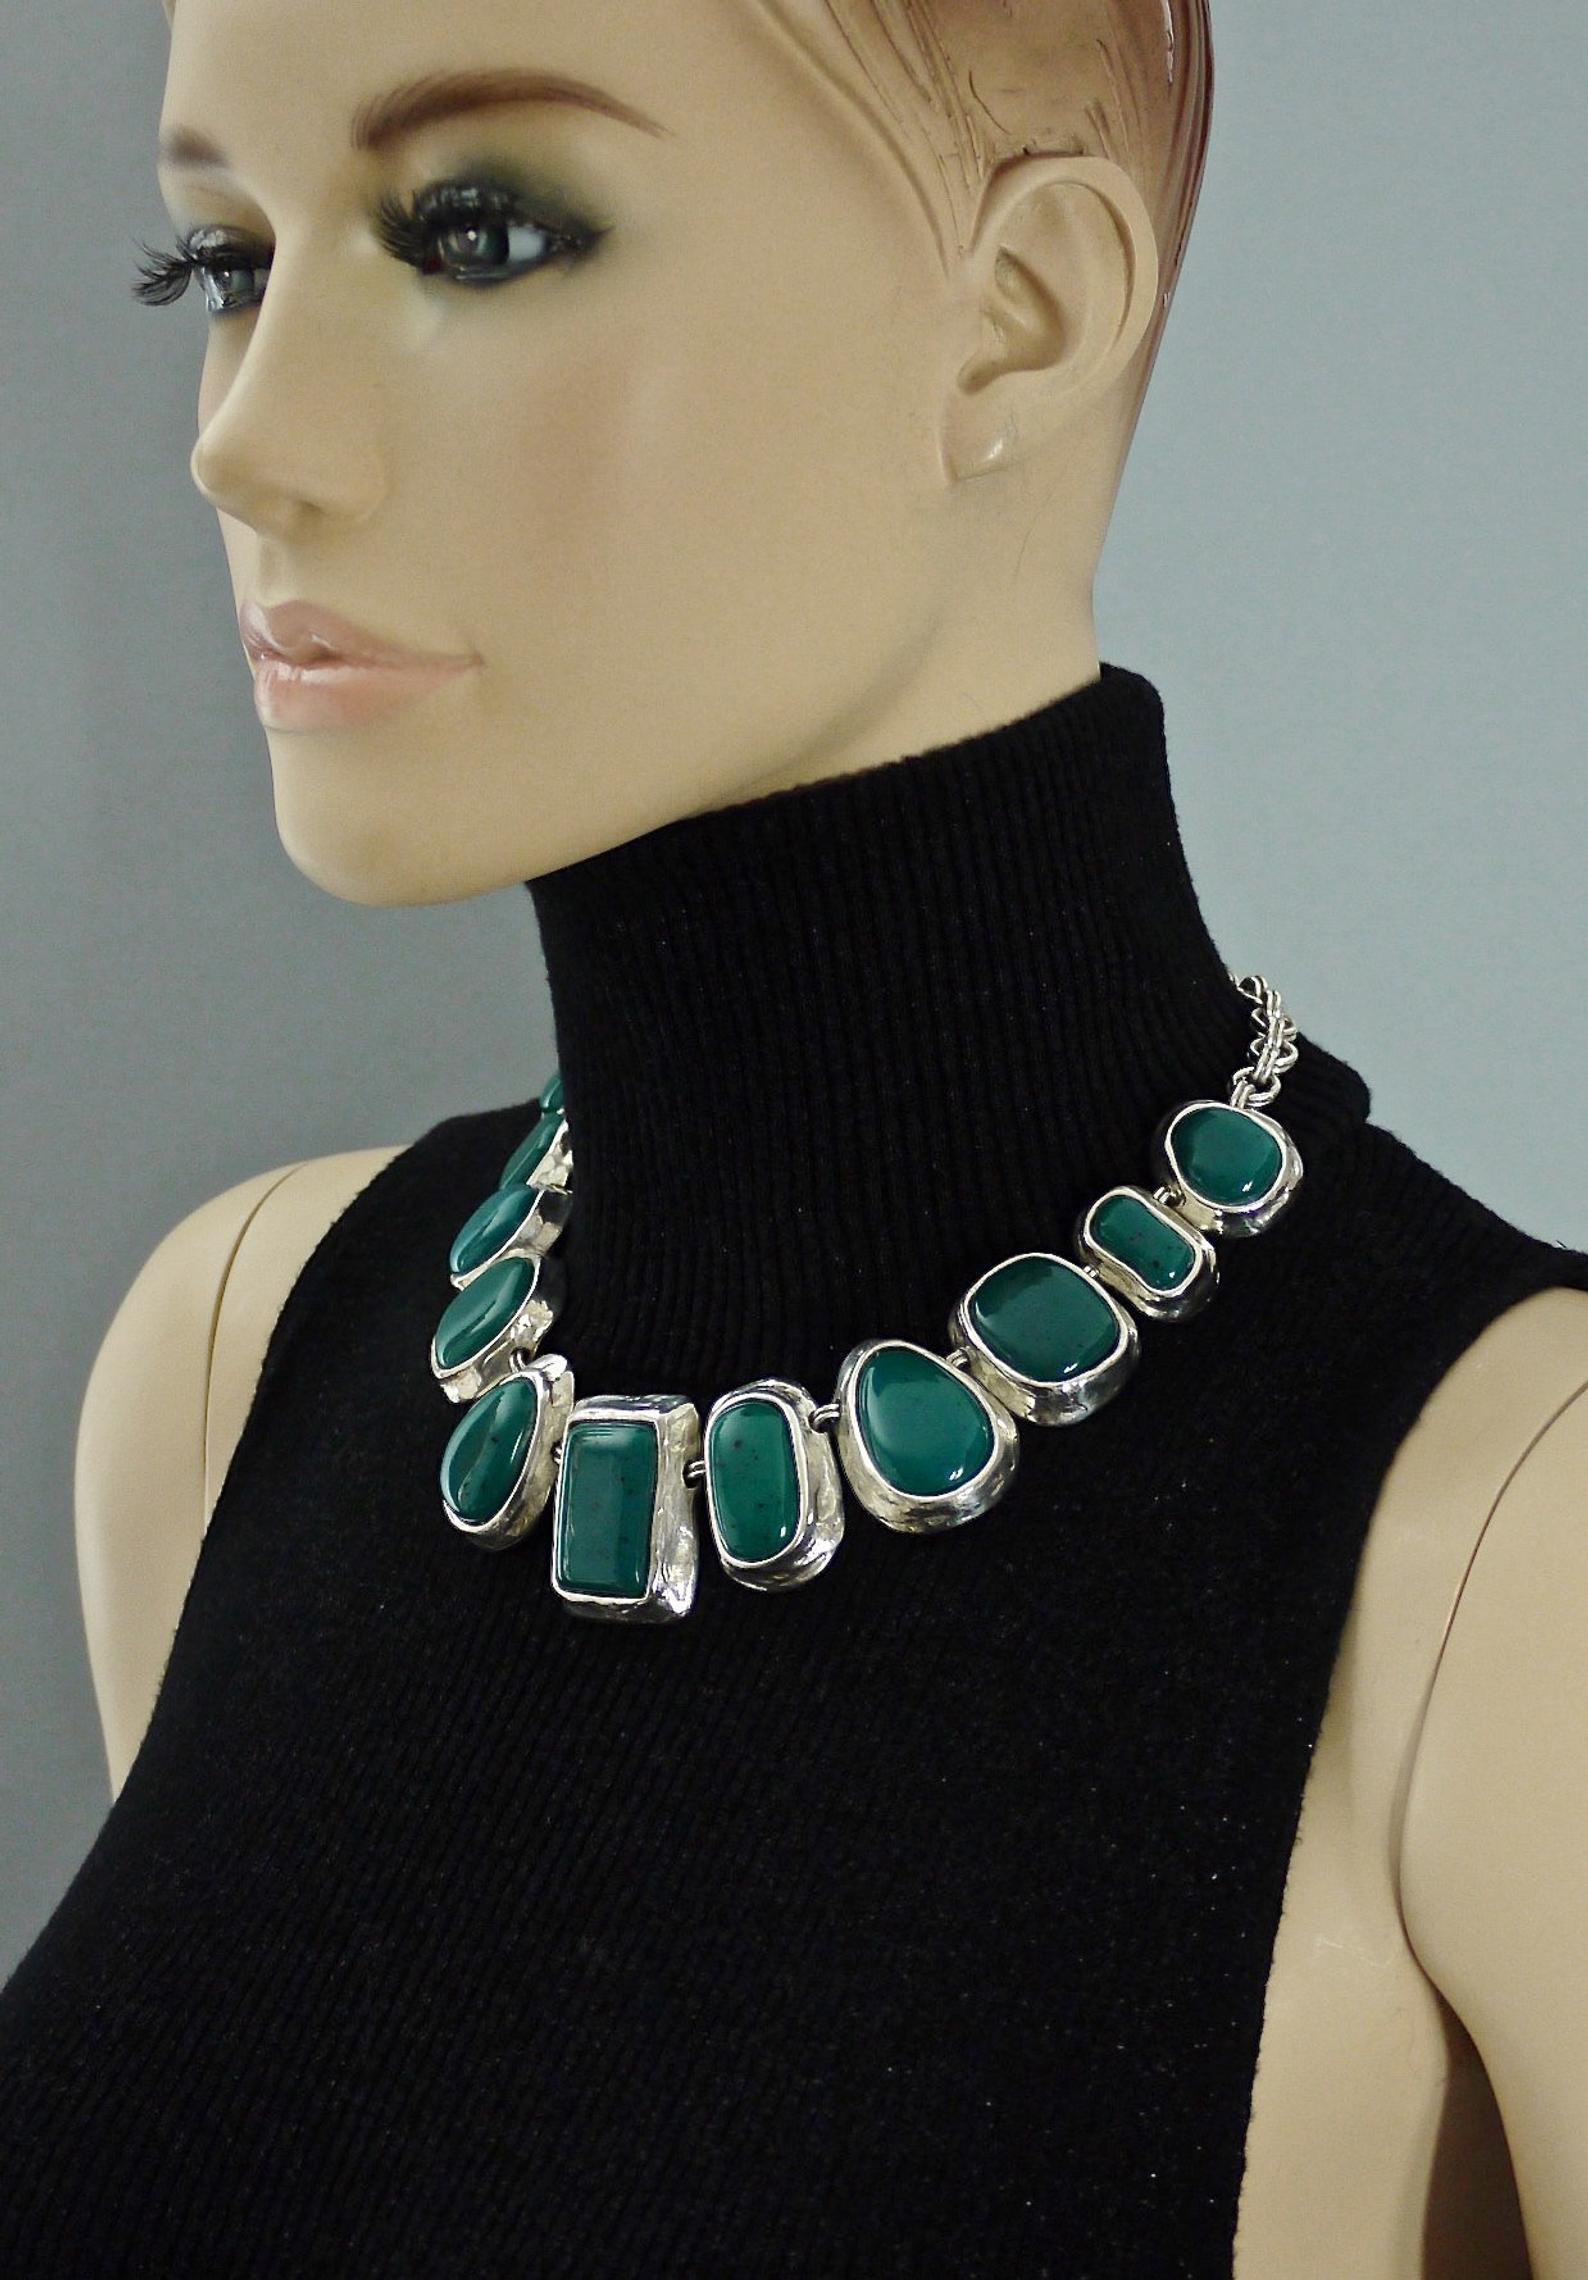 Vintage YVES SAINT LAURENT Ysl Faux Turquoise Geometric Cabochon Necklace

Measurements:
Height: 1.53 inches (3.9 cm)
Wearable Length: 17.71 inches (45 cm) to 18.89 inches (48 cm)

Features:
- 100% Authentic YVES SAINT LAURENT.
- Chunky geometric